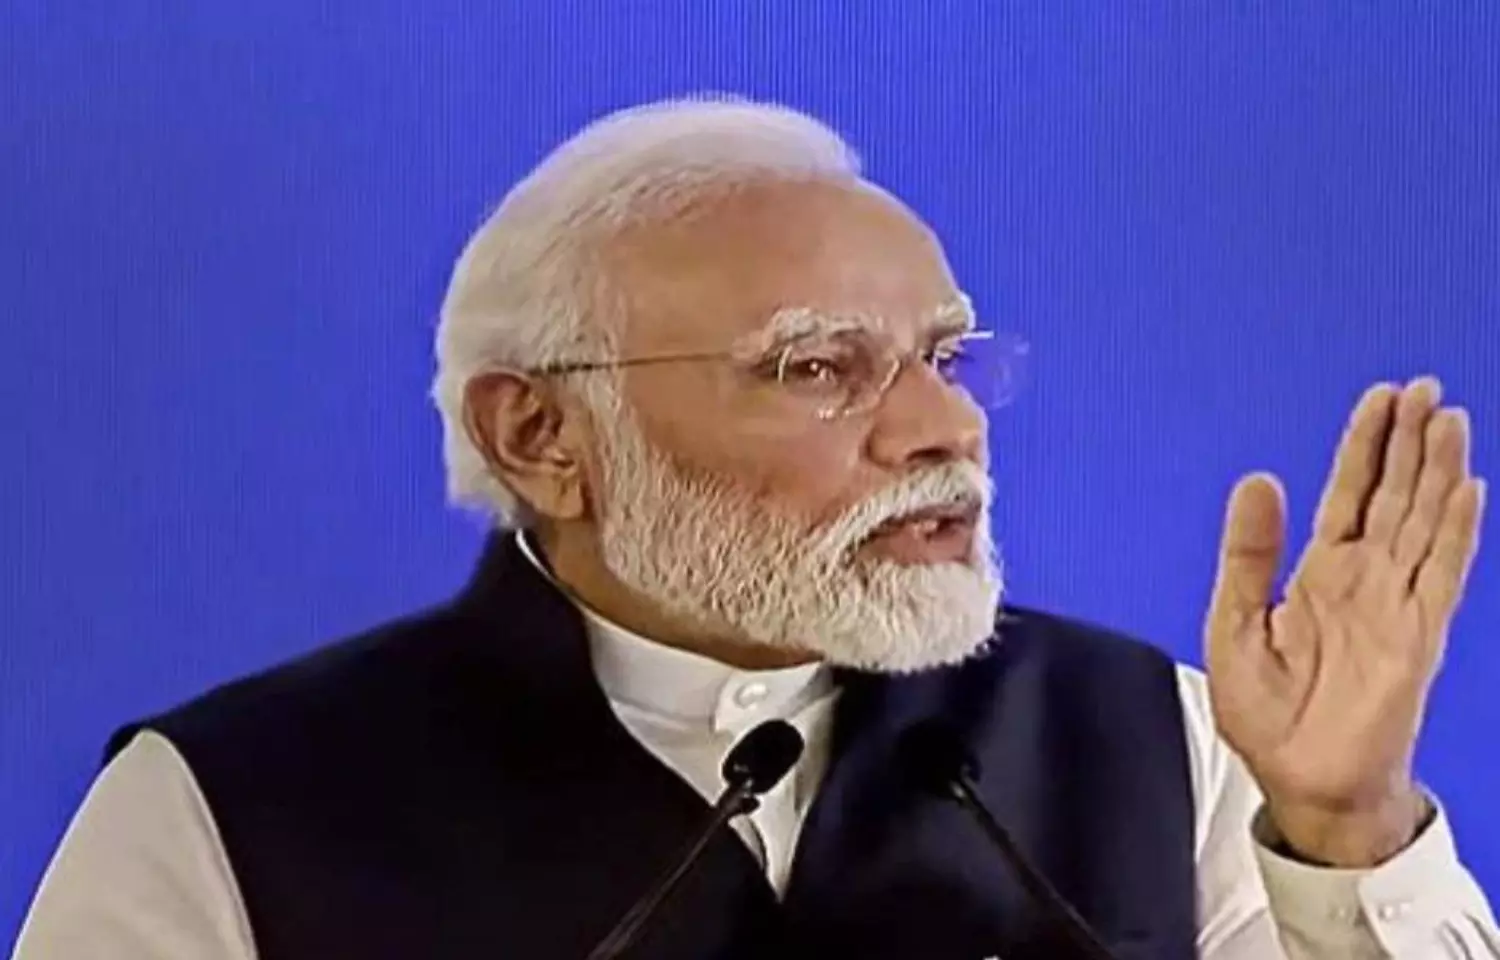 PM Modi: AYUSH sector has increased to over USD 18 bn from USD 3 bn in 2014